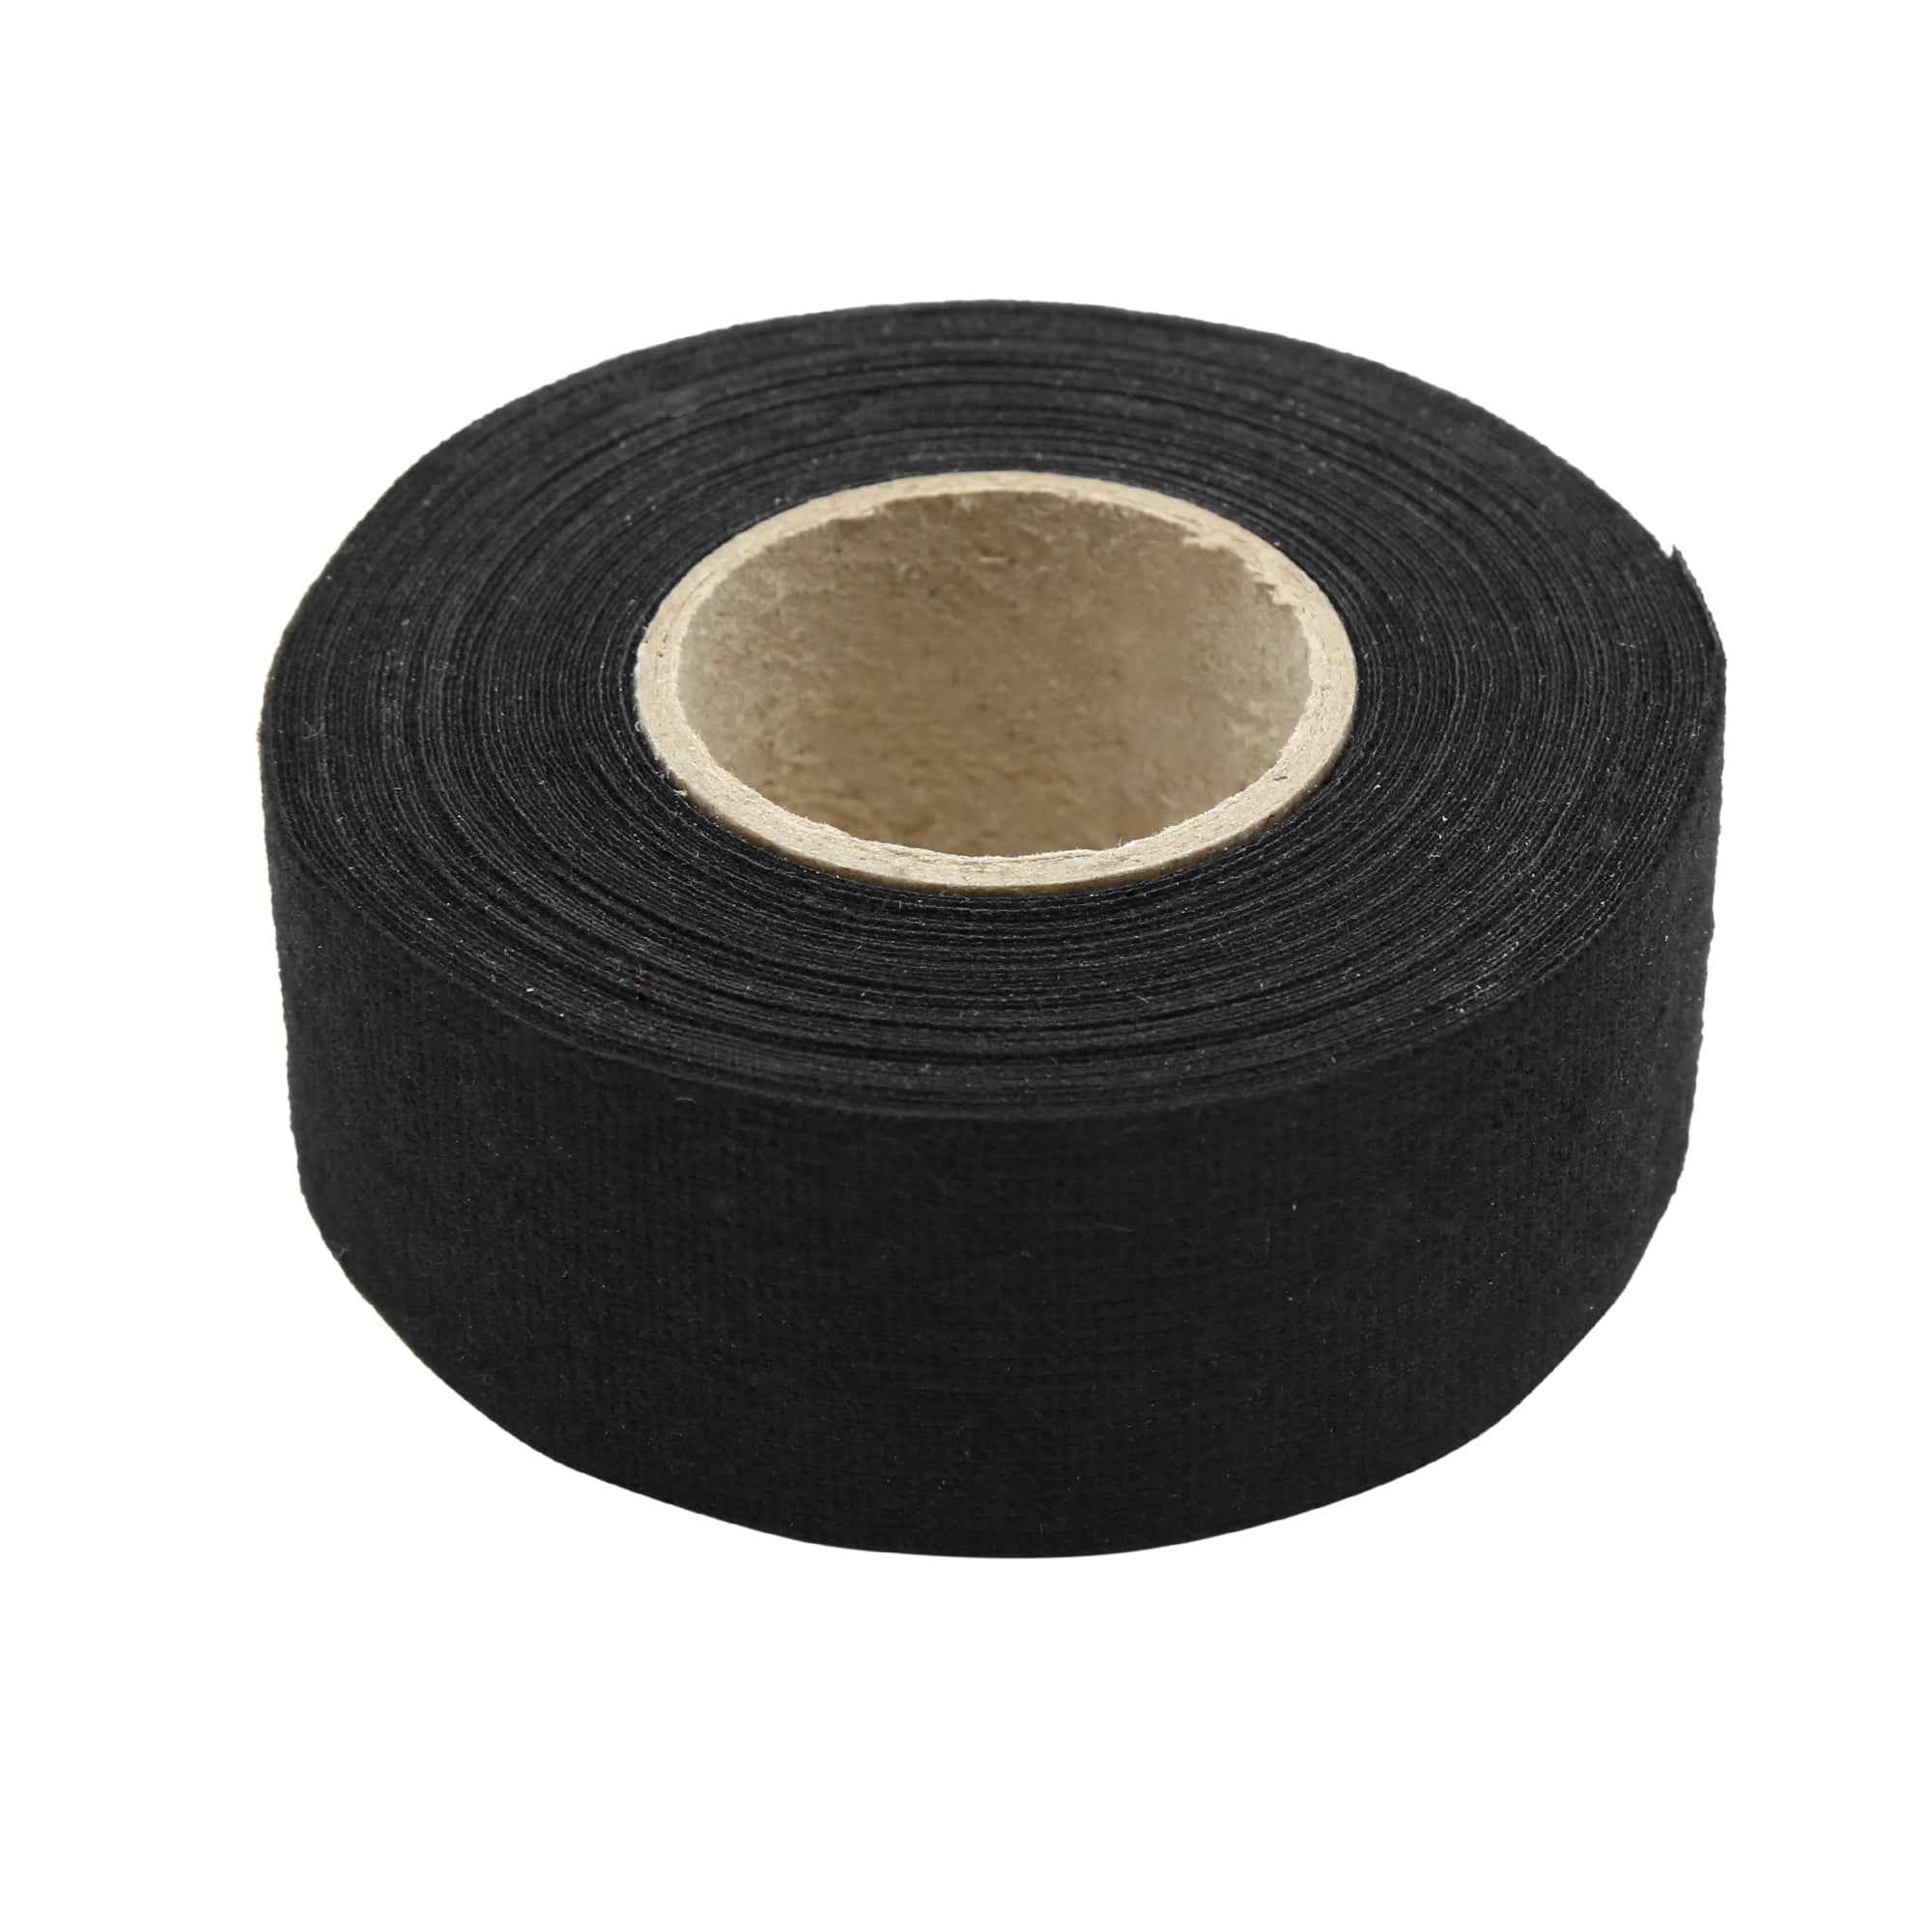 Black Adhesive Cloth Fabric Tape Cable Wire Wrap Cover Protector Tool Accessory 